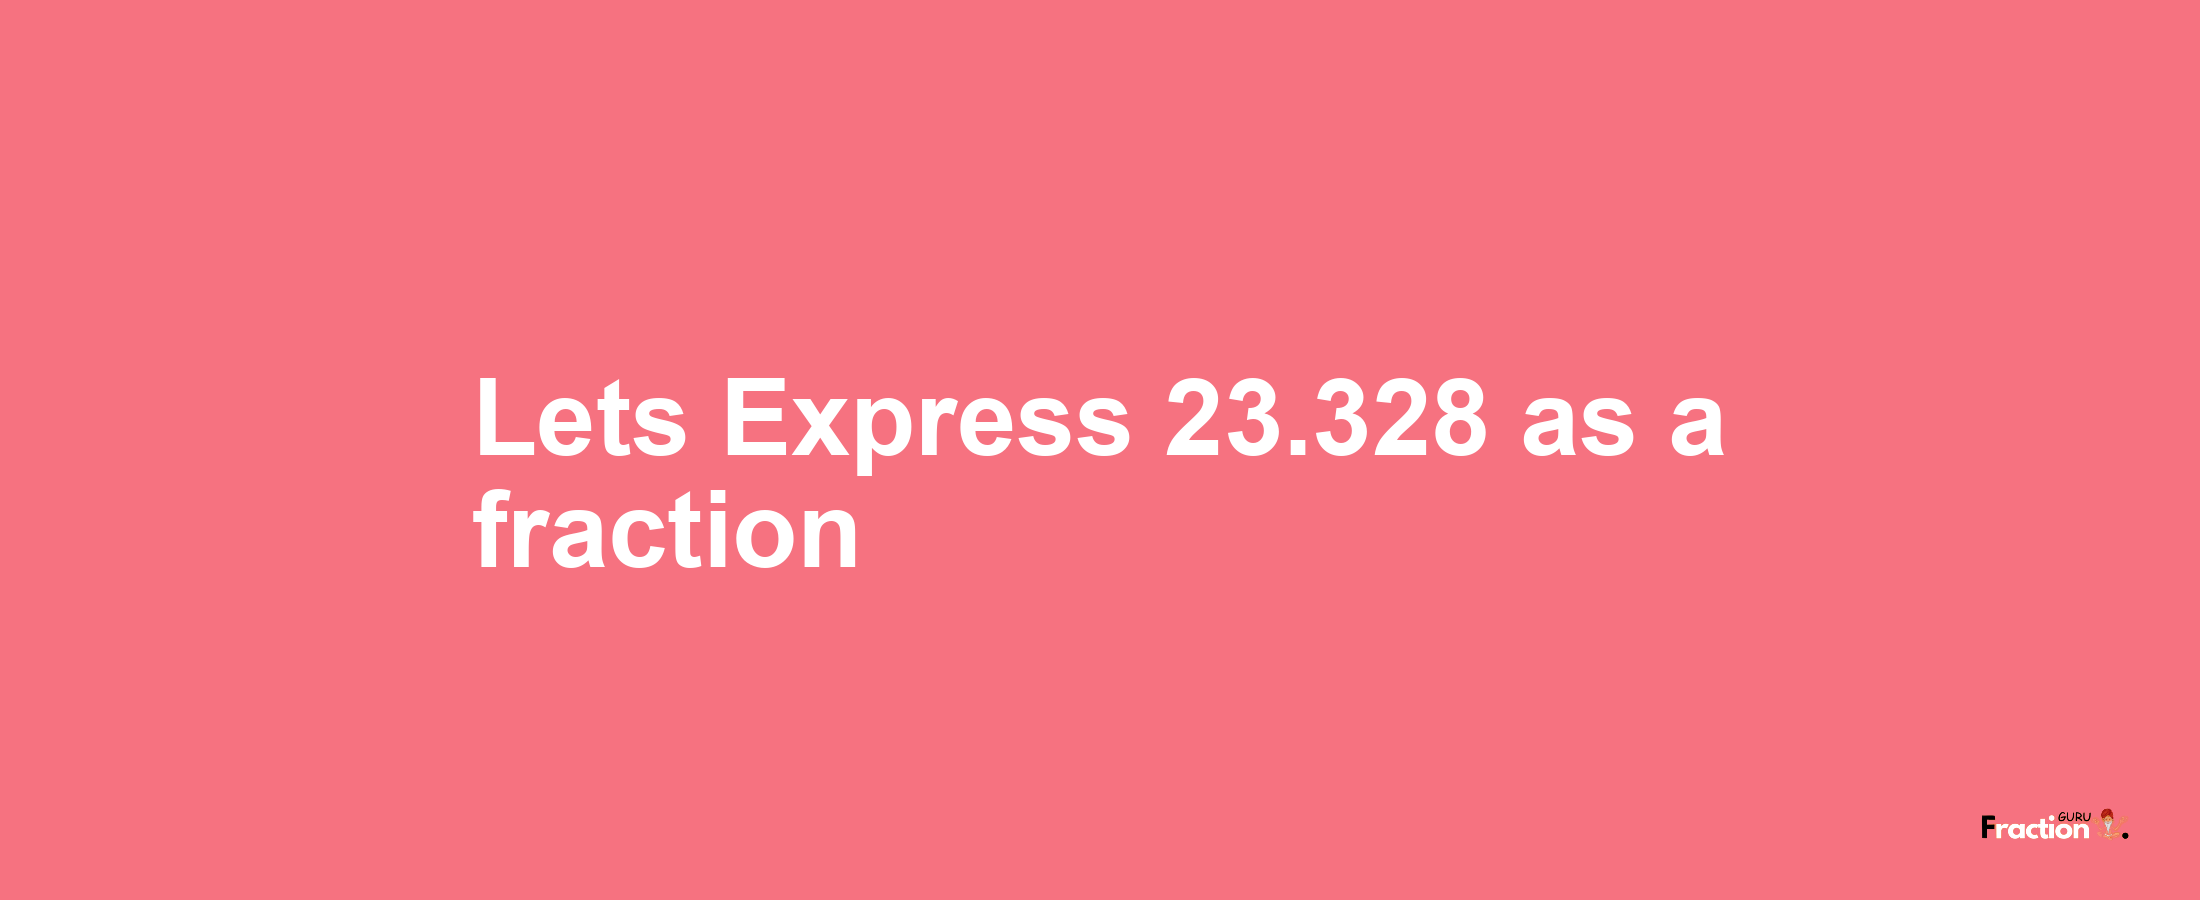 Lets Express 23.328 as afraction